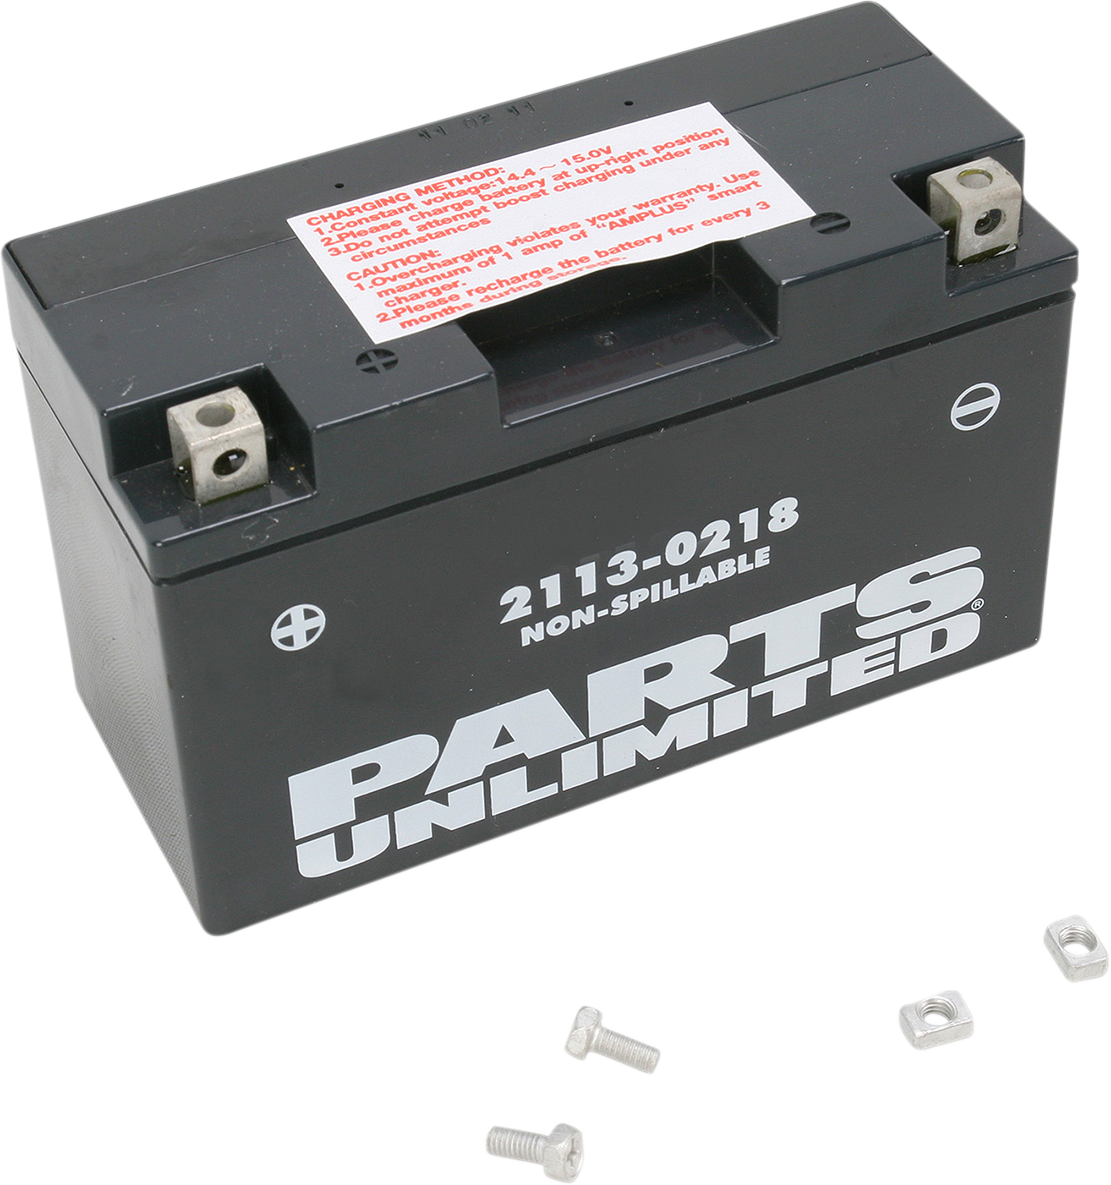 Parts Unlimited Agm Battery - Yt7b-Bs Ct7b-4